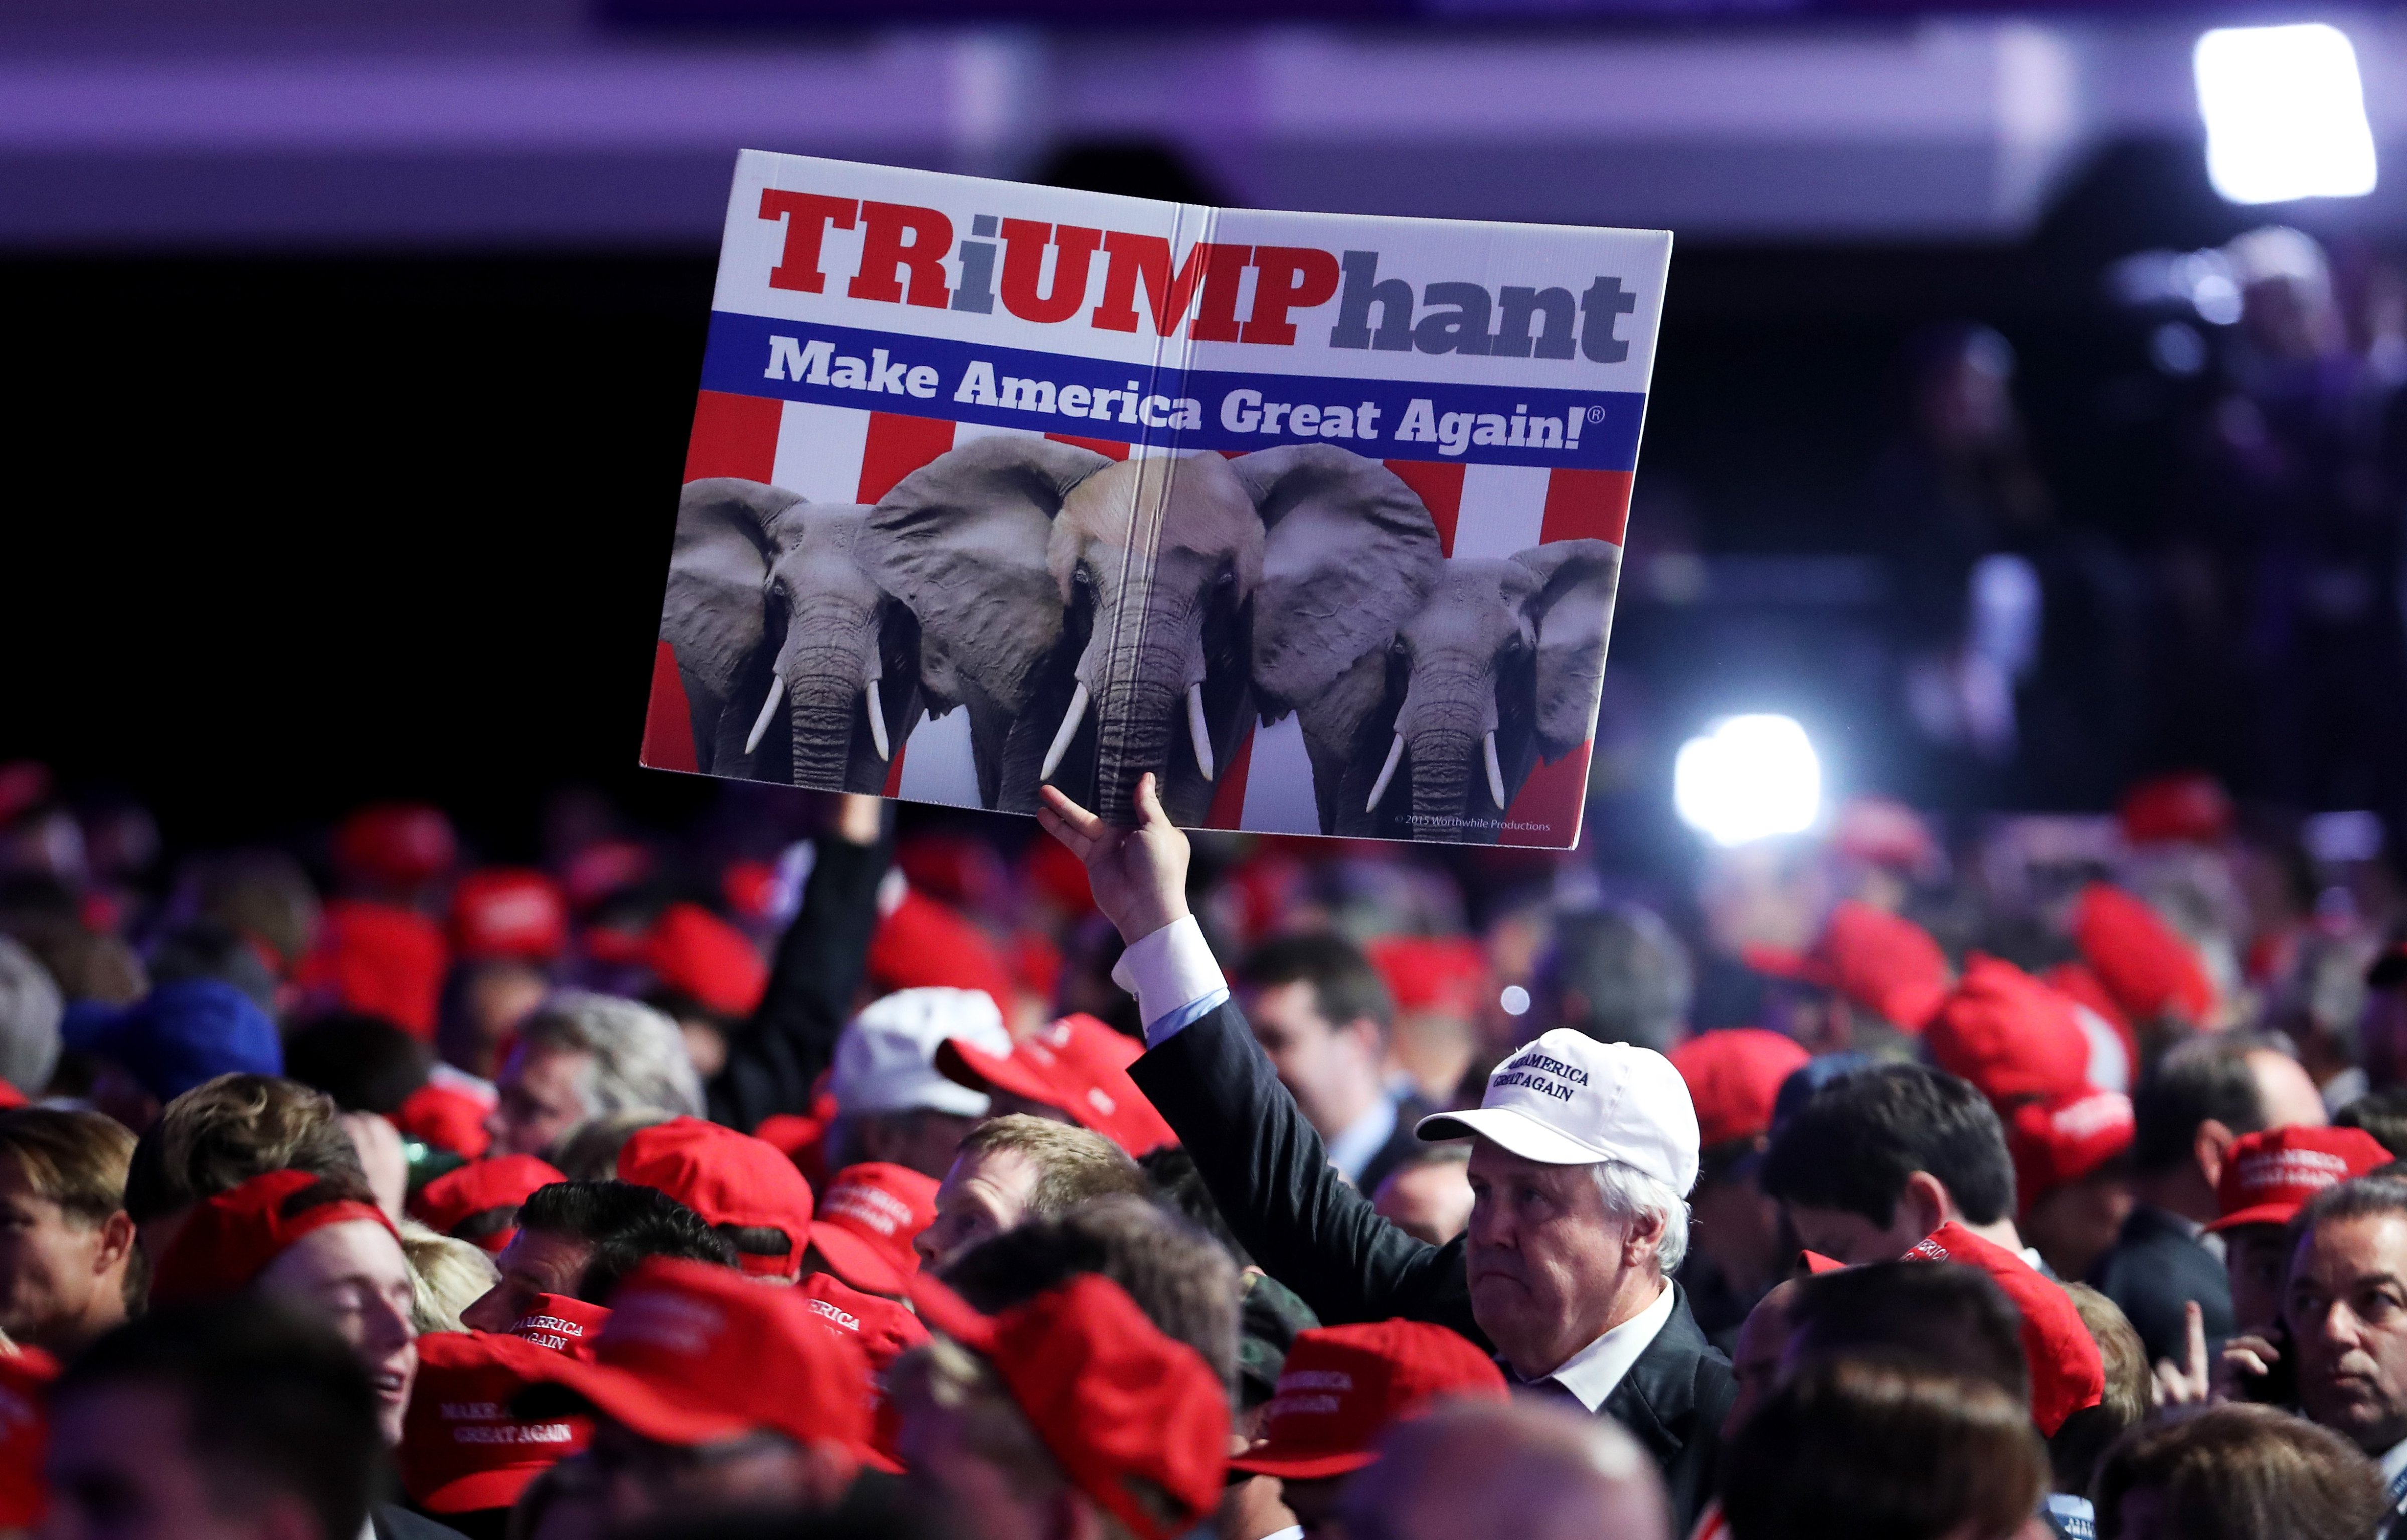 A supporter holds up a sign in support of Republican presidential nominee Donald Trump during the election night event at the New York Hilton Midtown on Nov. 8, 2016. (Spencer Platt—Getty Images)